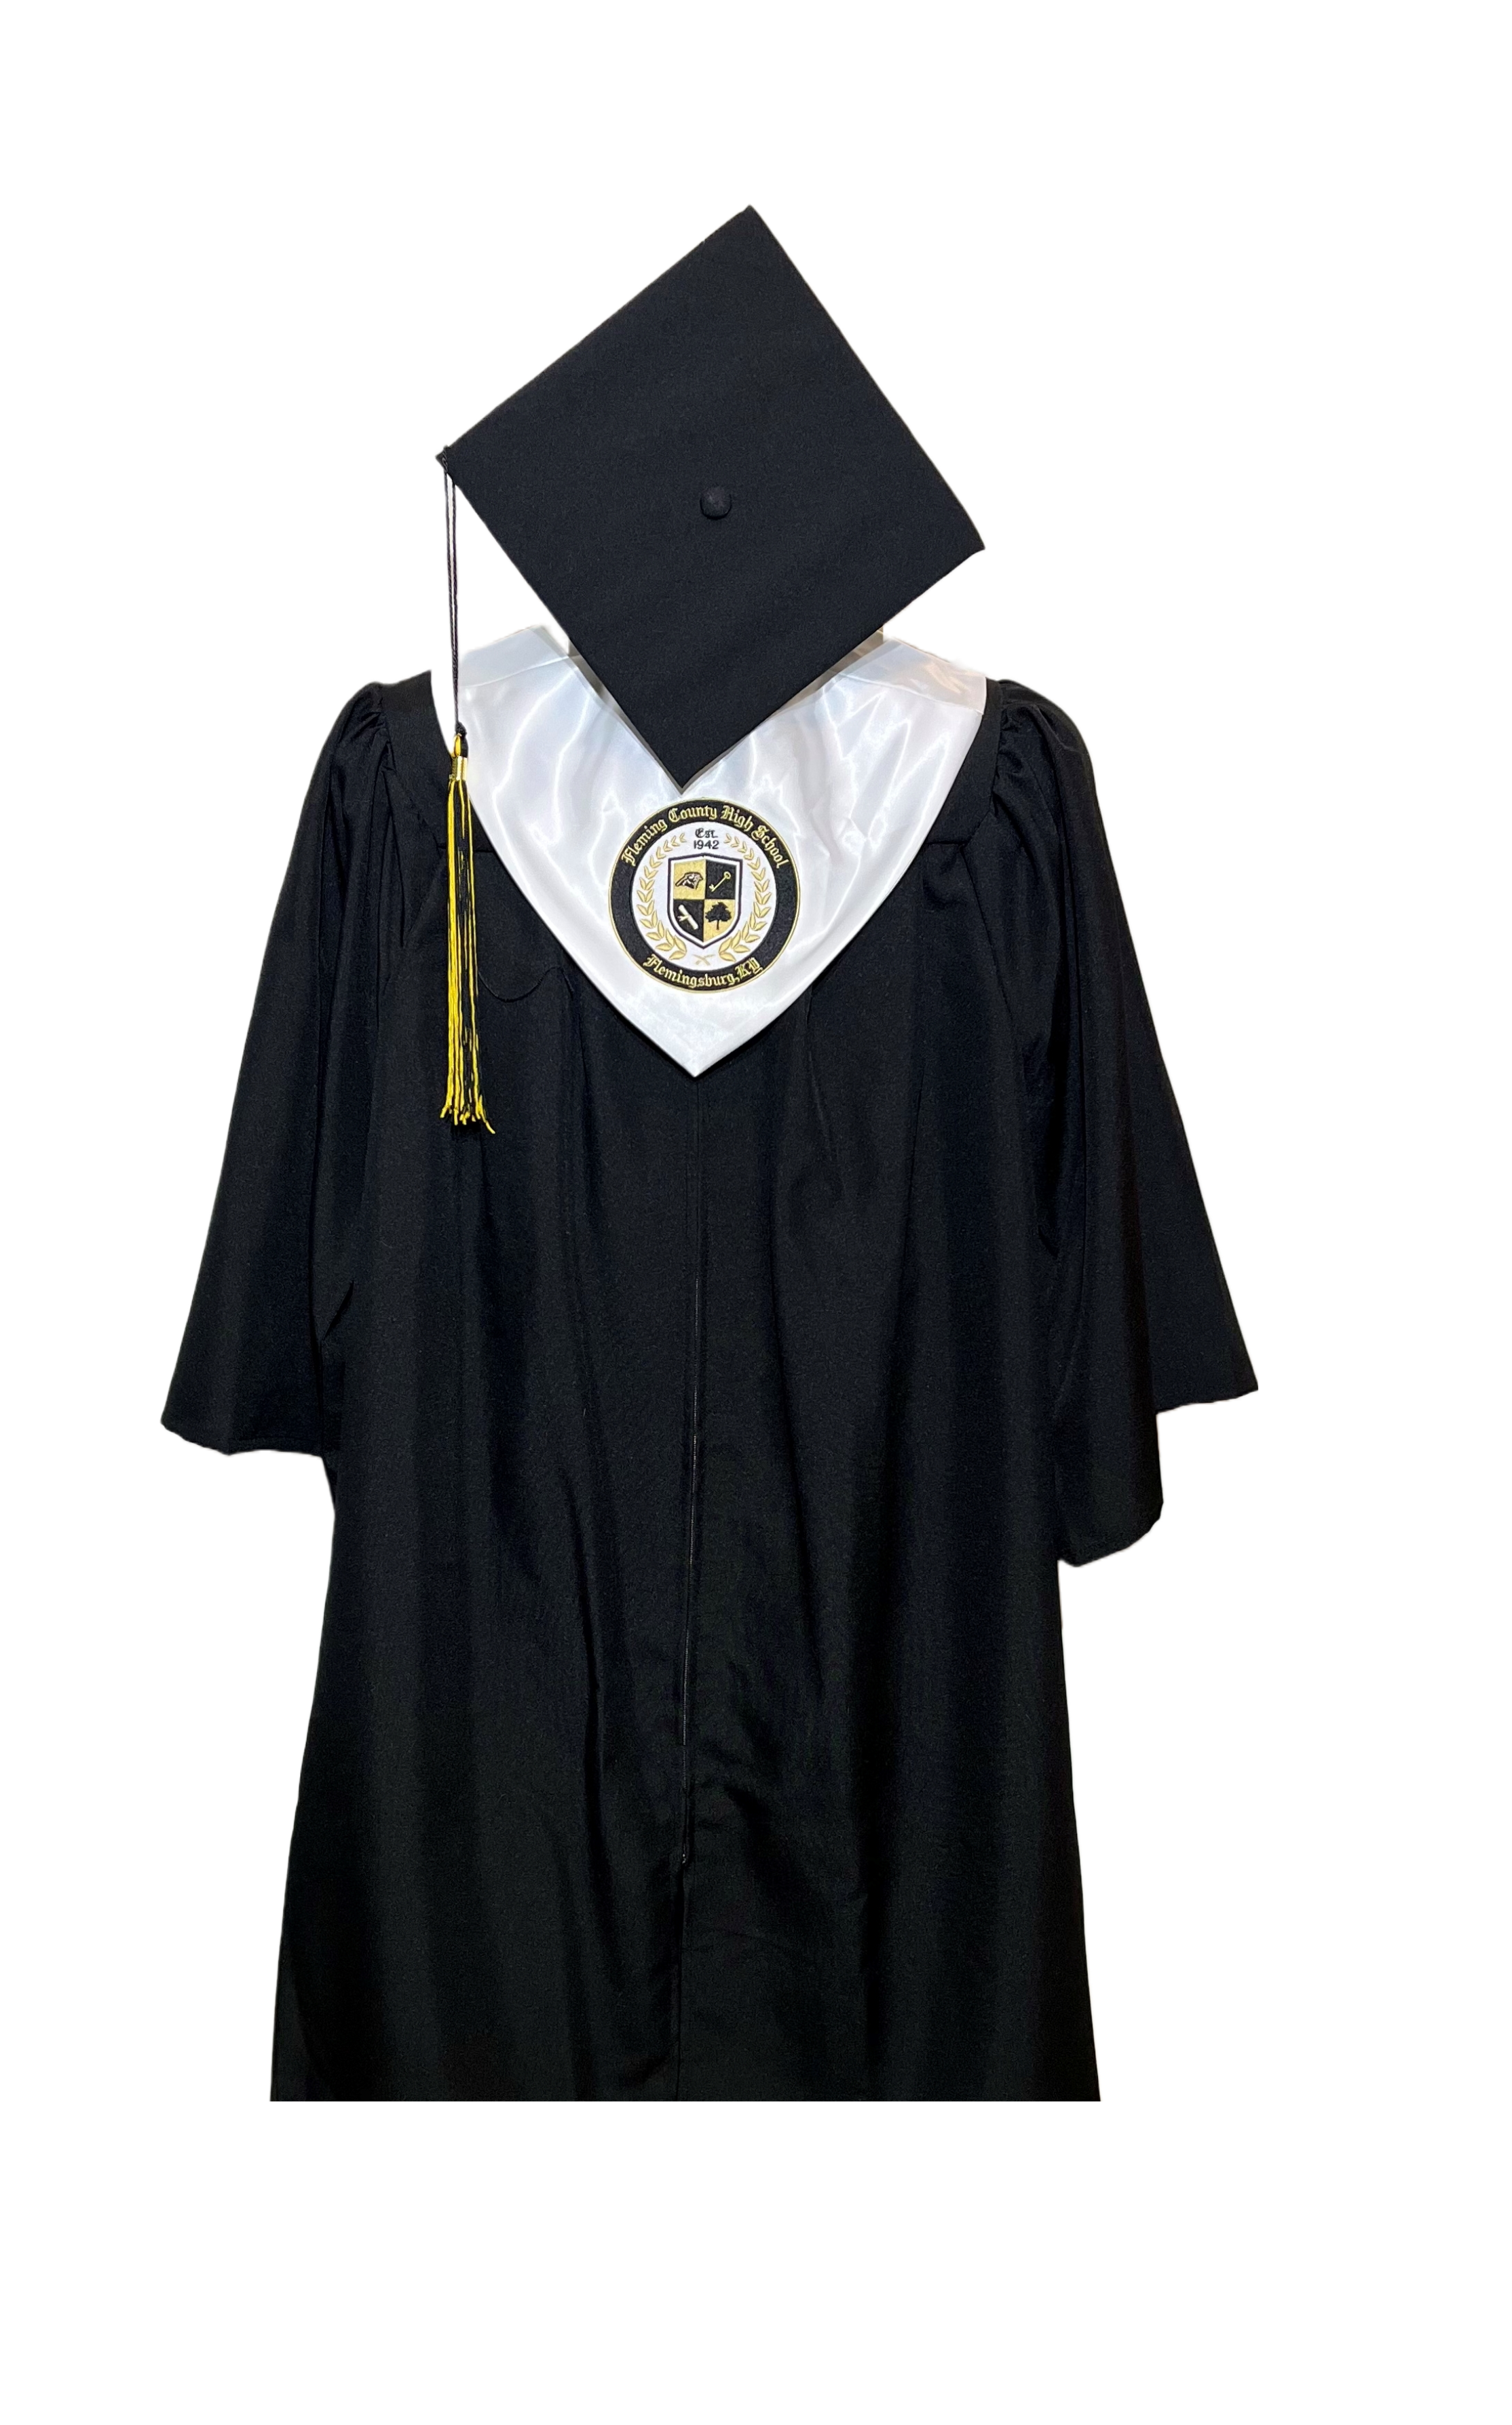 Buy Custom Masters Graduation Gown and Accessories